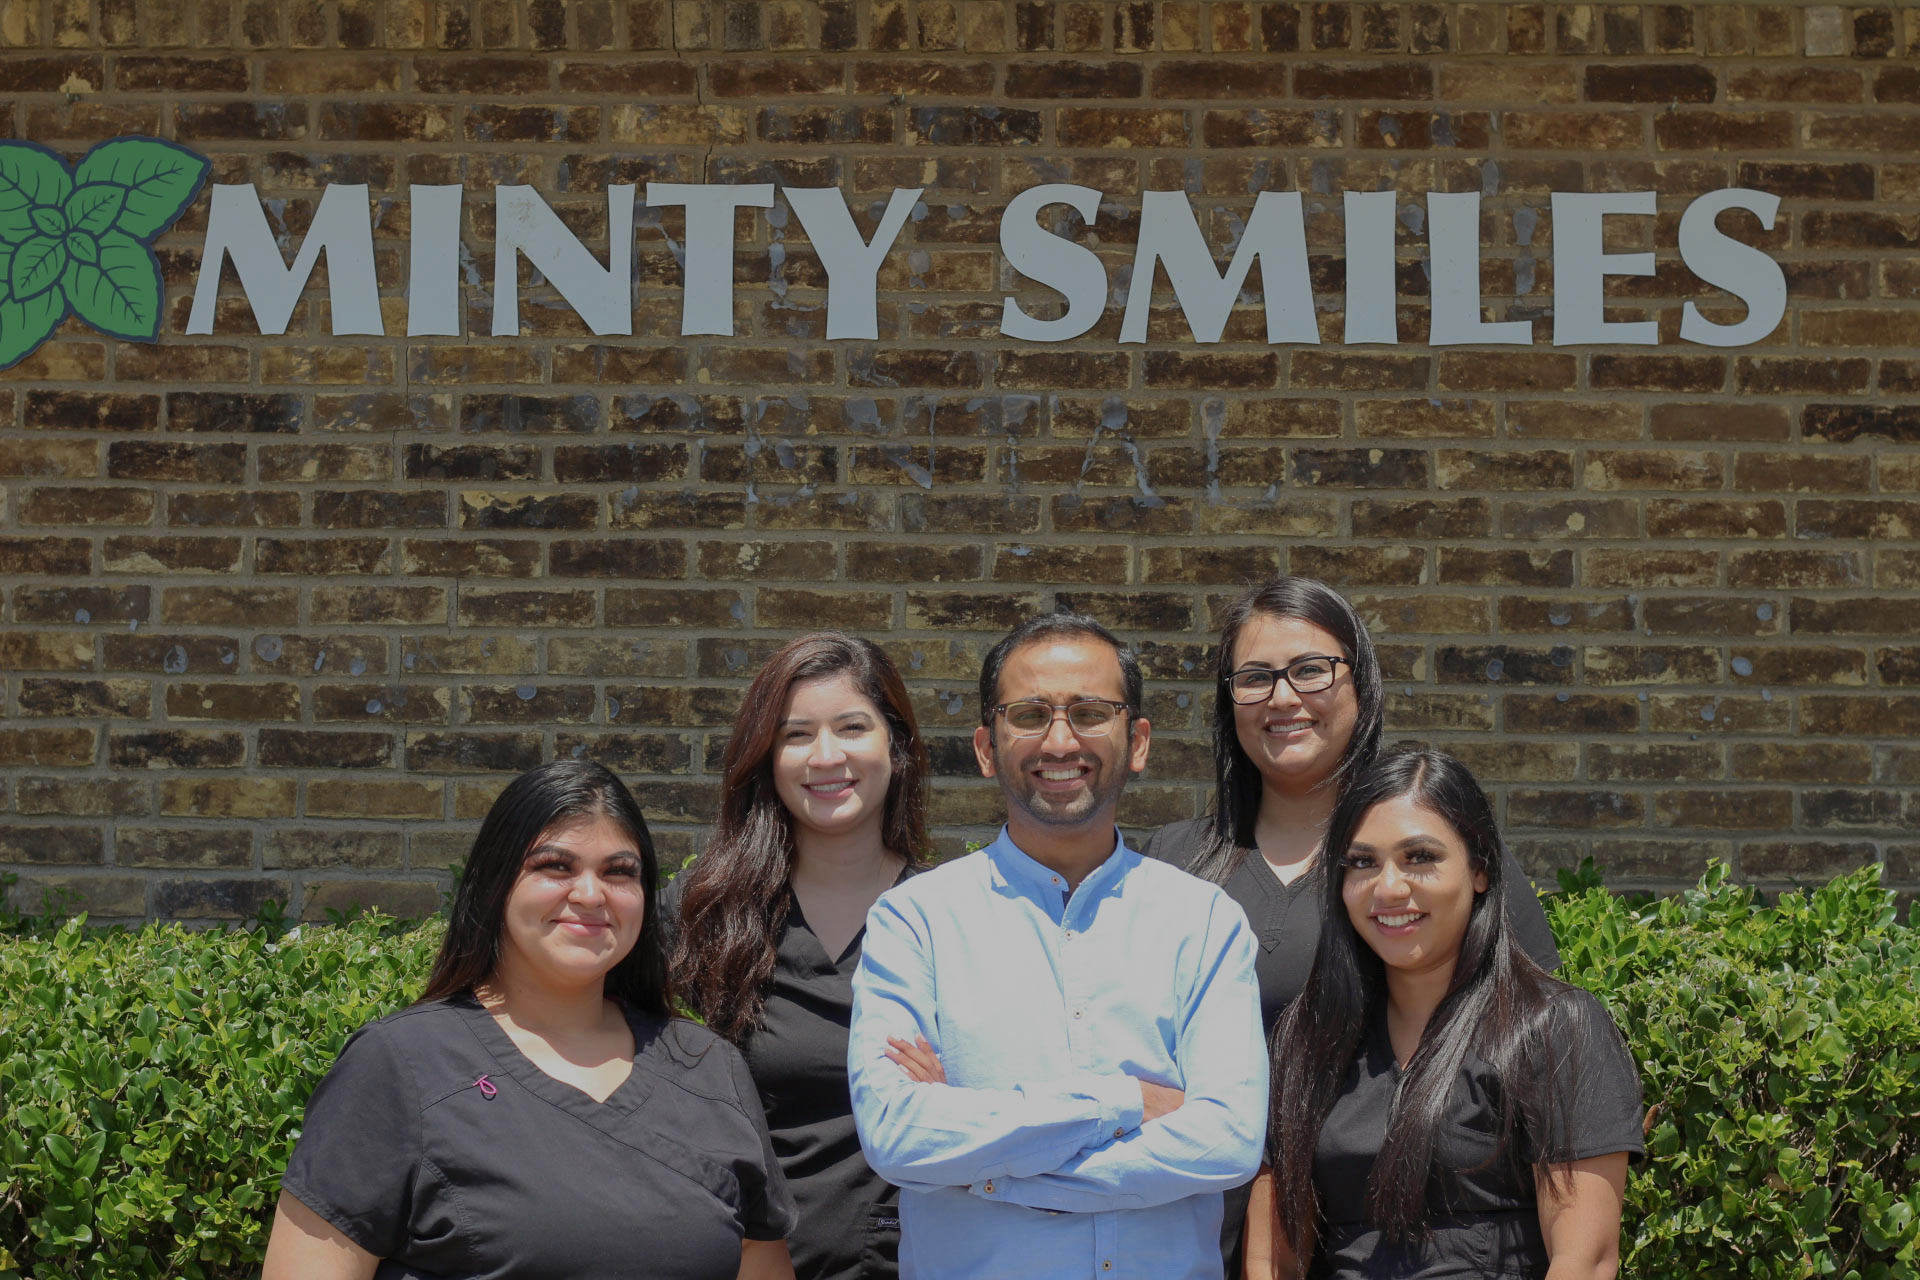 a group of people are posing for a picture in front of a minty smiles sign .